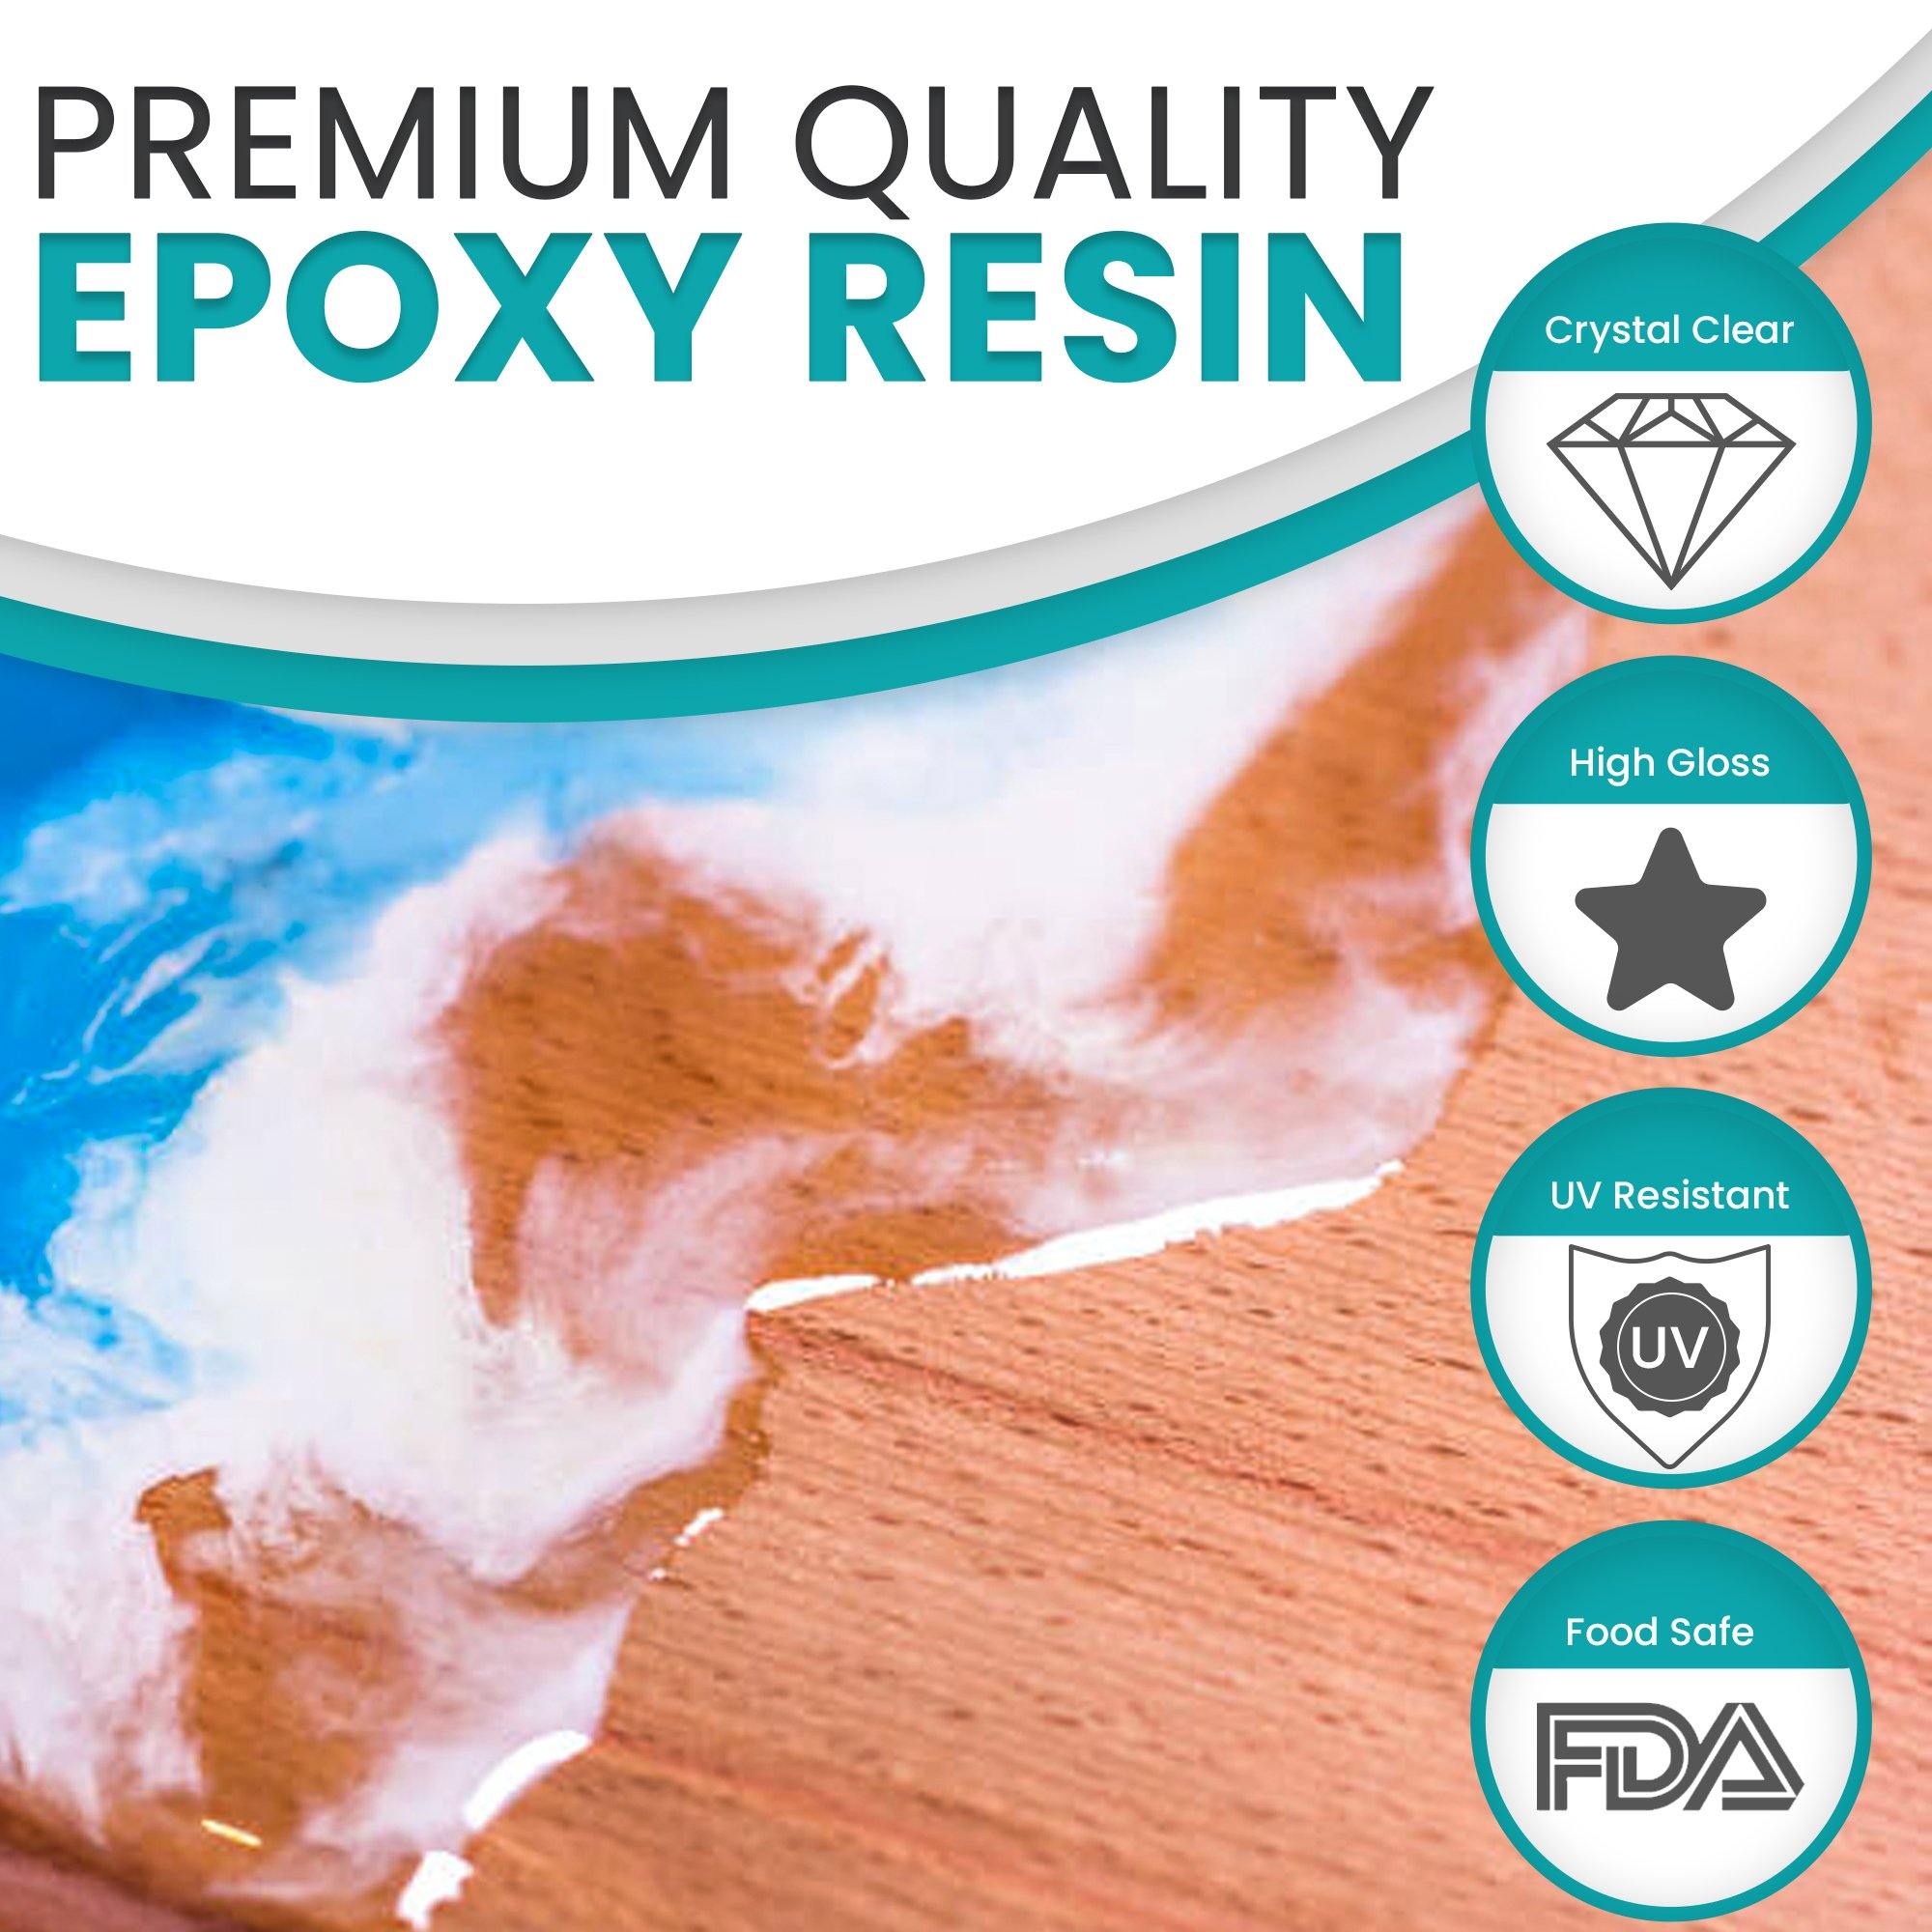 2 Gallon Epoxy Resin Kit Artresin Crystal Clear and Glossy Finish, Food Safe,  No Fumes or Vocs Use on Wood, Canvas, and More 